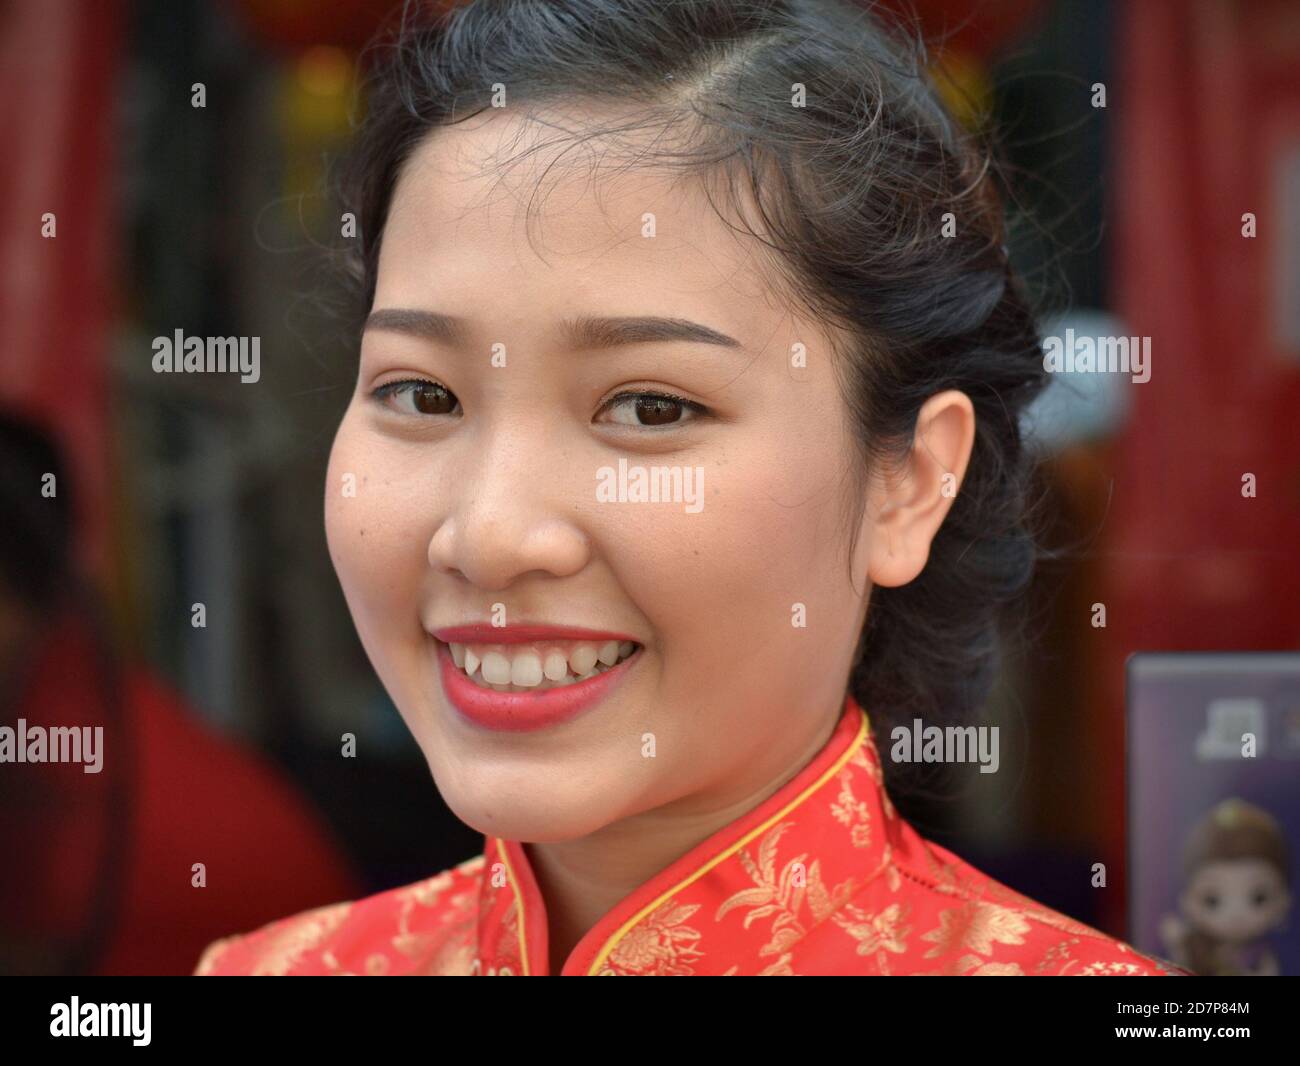 Young Thai Chinese woman wears a traditional red and gold Chinese silk dress and smiles for the camera during Chinese New Year. Stock Photo